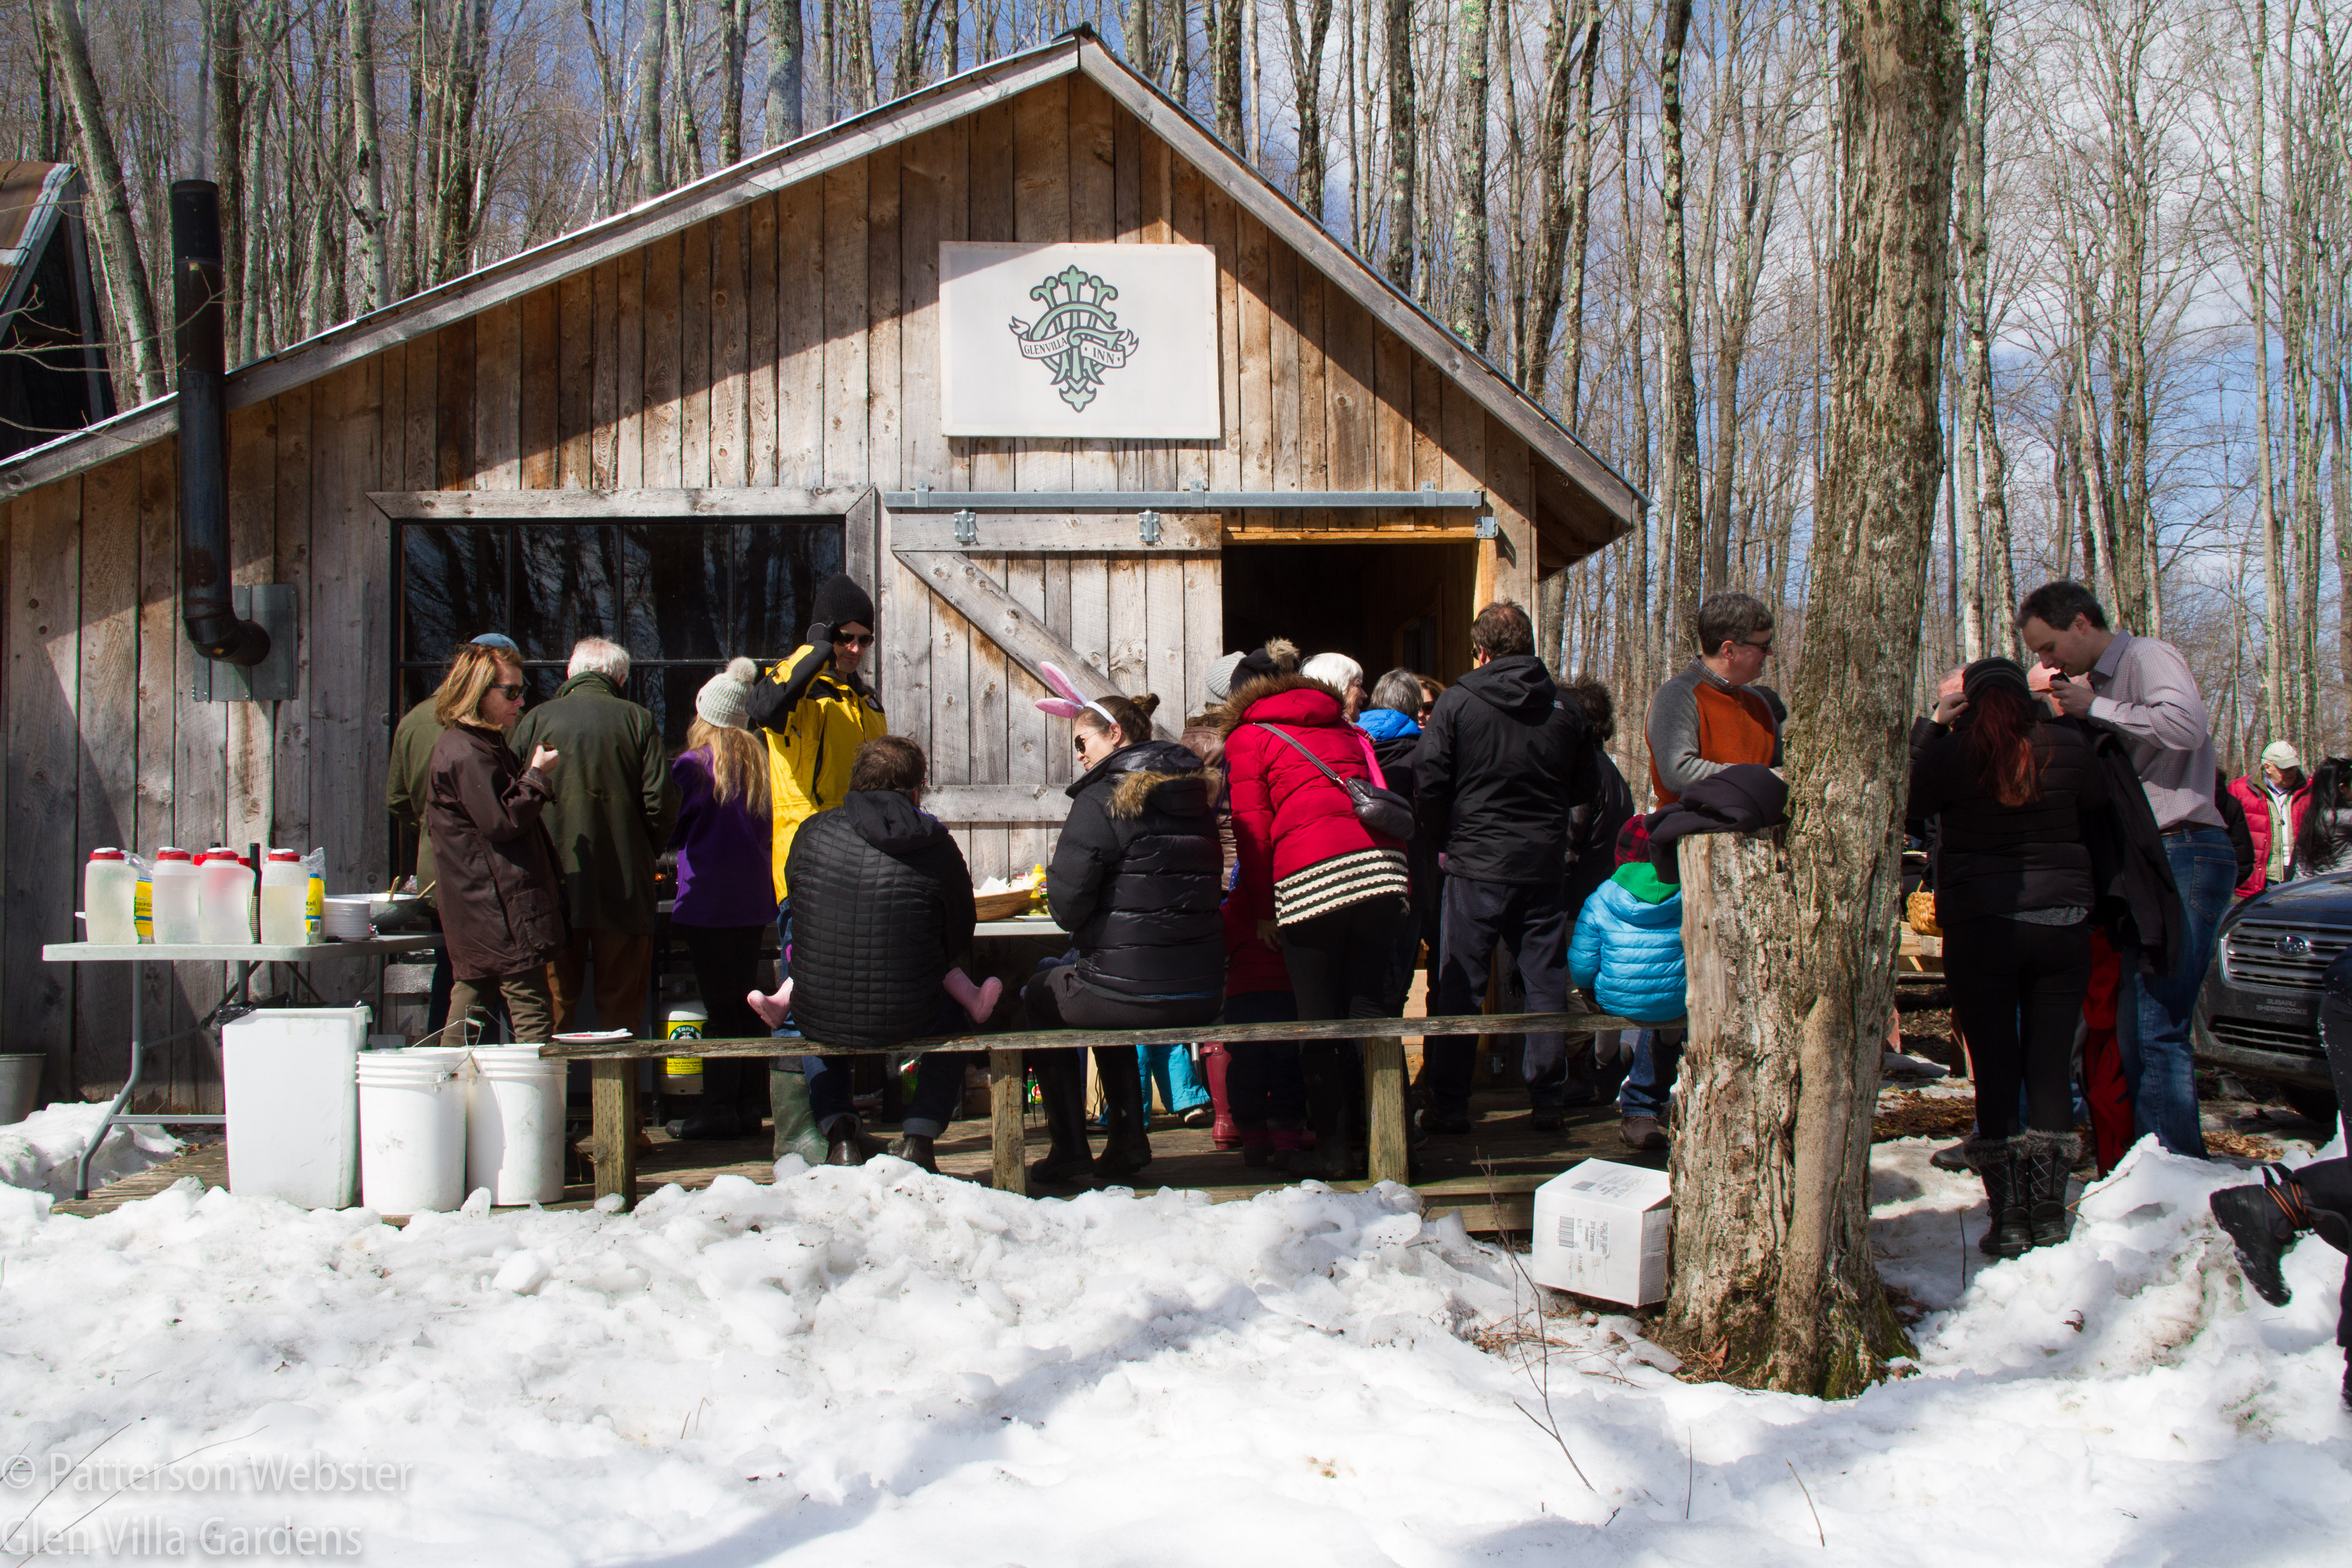 About 60 people gathered outside our sugar camp on a beautiful day. 